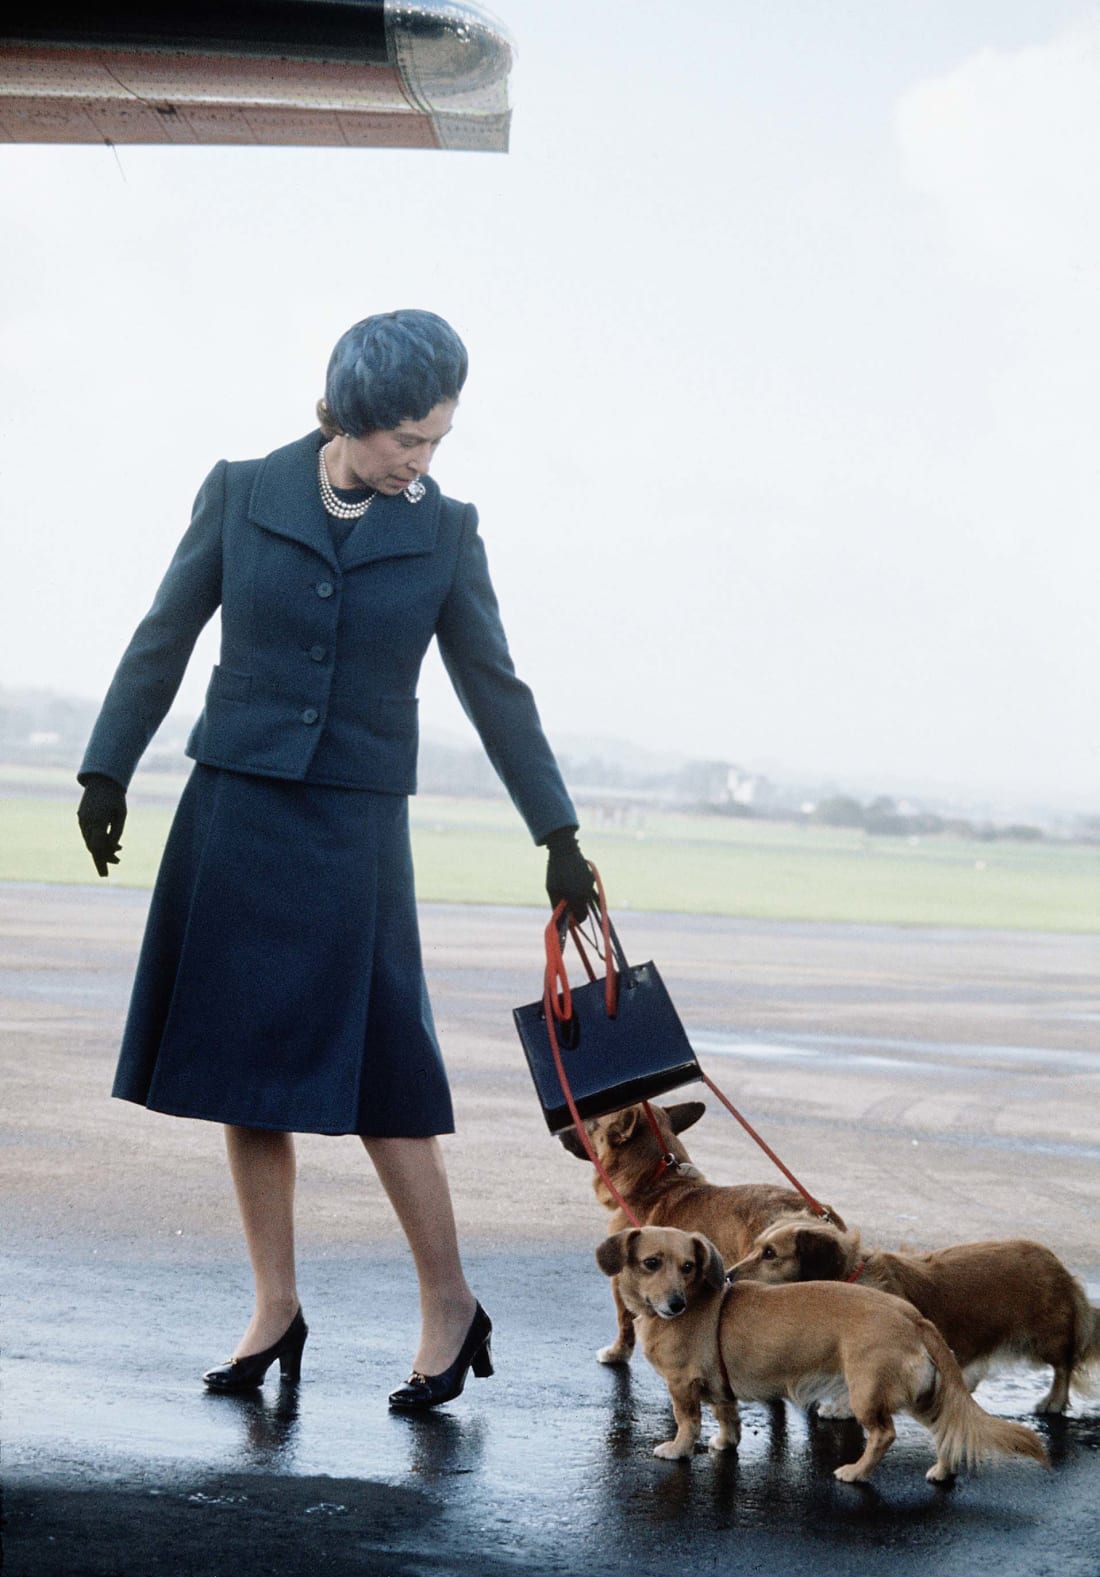 Queen Elizabeth ll arrives at Aberdeen Airport with her corgis ahead of a vacation in Balmoral, Scotland in 1974.